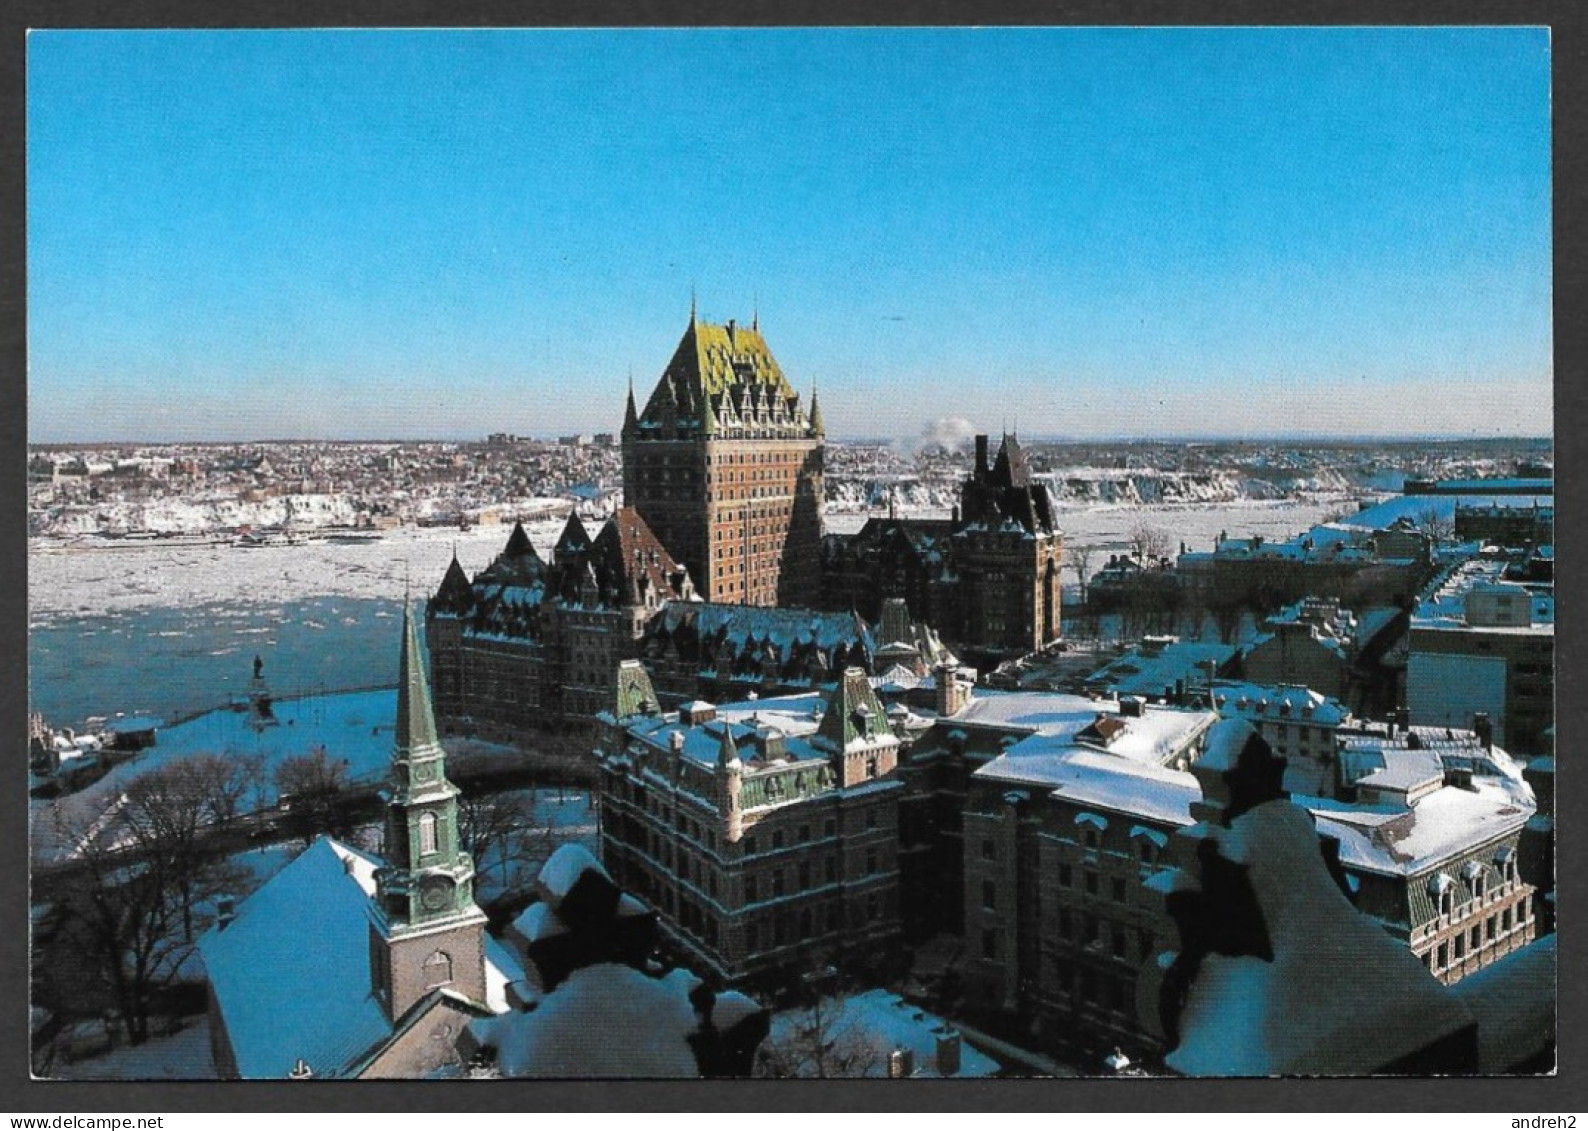 Québec - Château Frontenac - Château Frontenac, Cathédrale Anglicaine - Uncirculated Non Circulée Photo Claude Huot - Québec - Château Frontenac